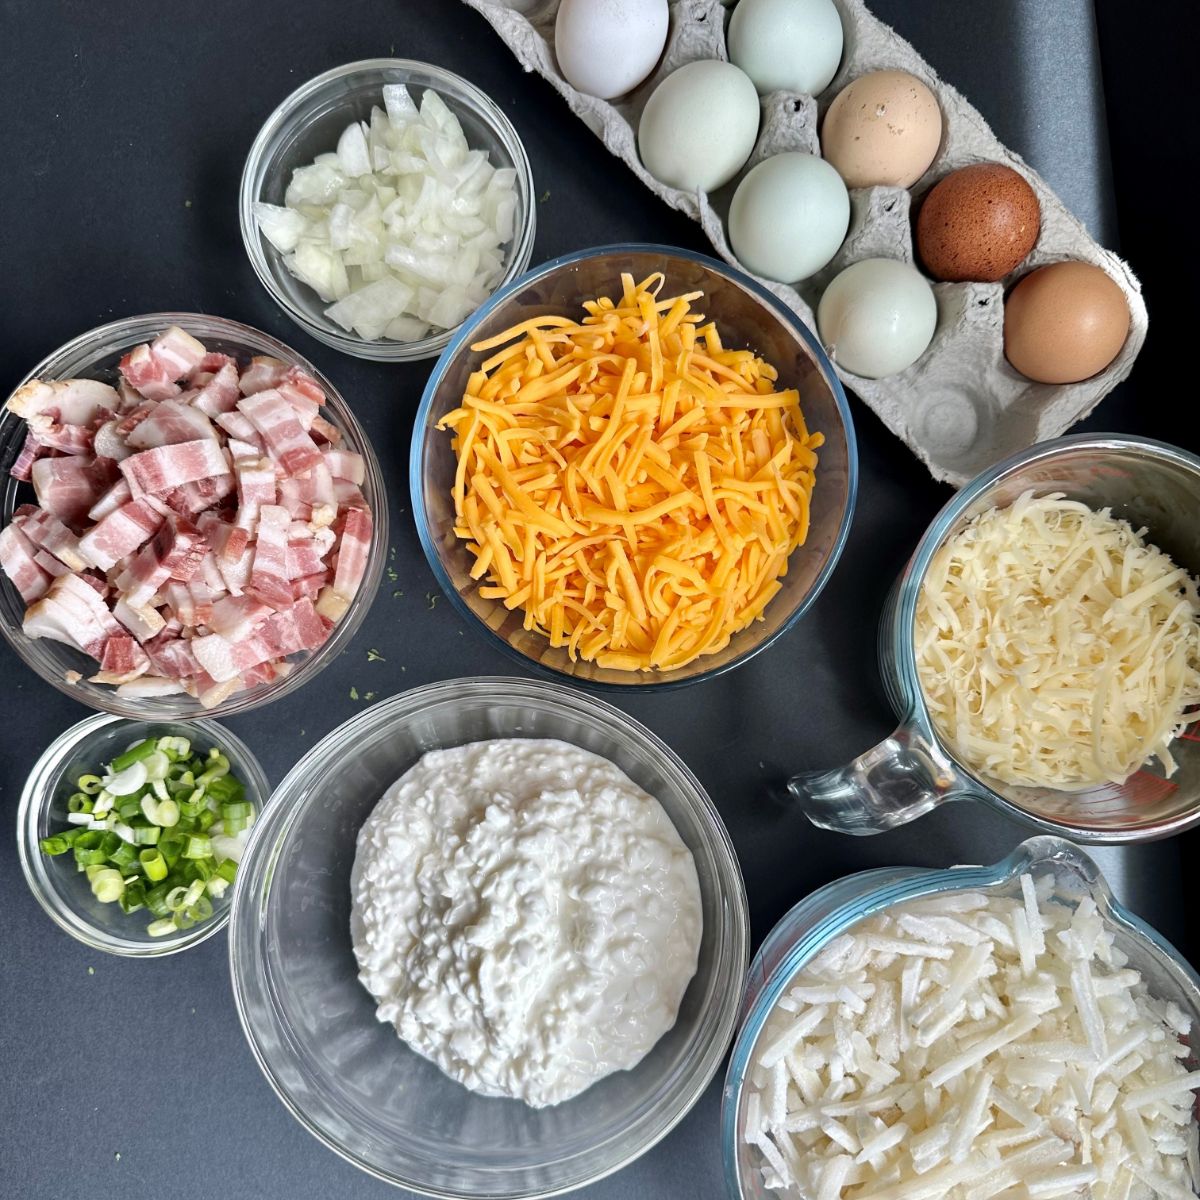 Ingredients for Amish Breakfast Casserole.